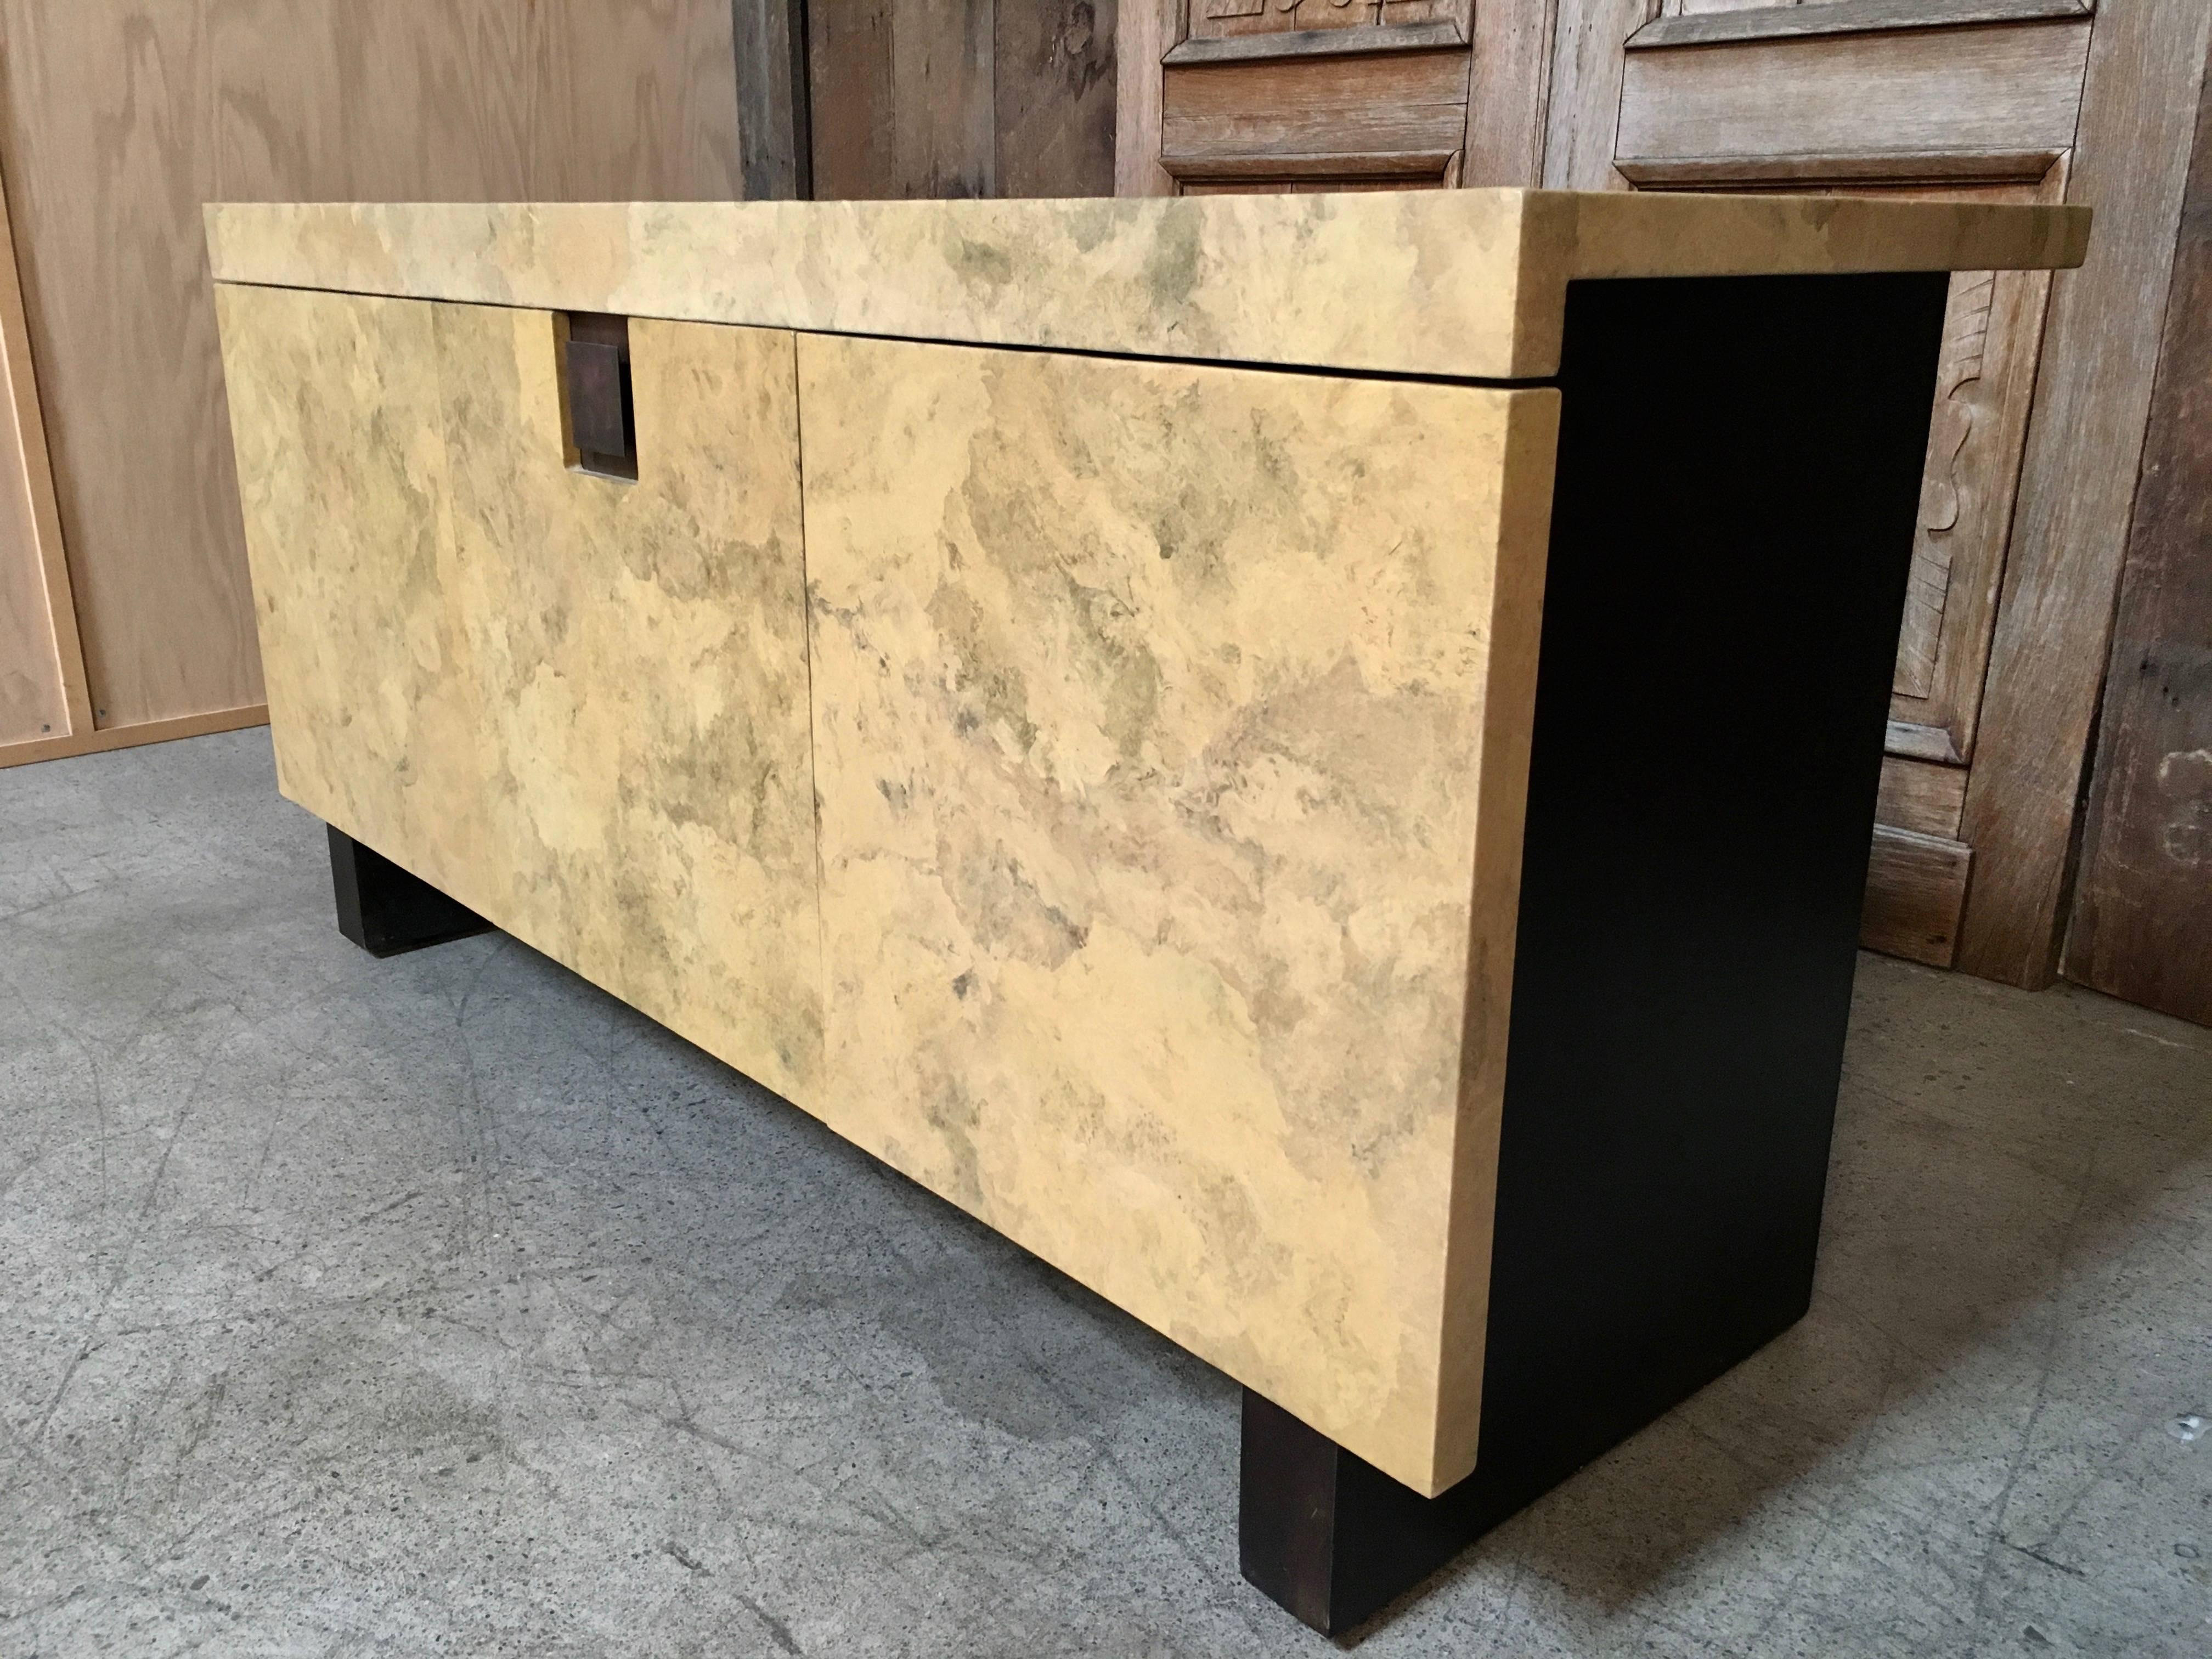 Nice three-door parchment paper covered credenza solid wood construction.